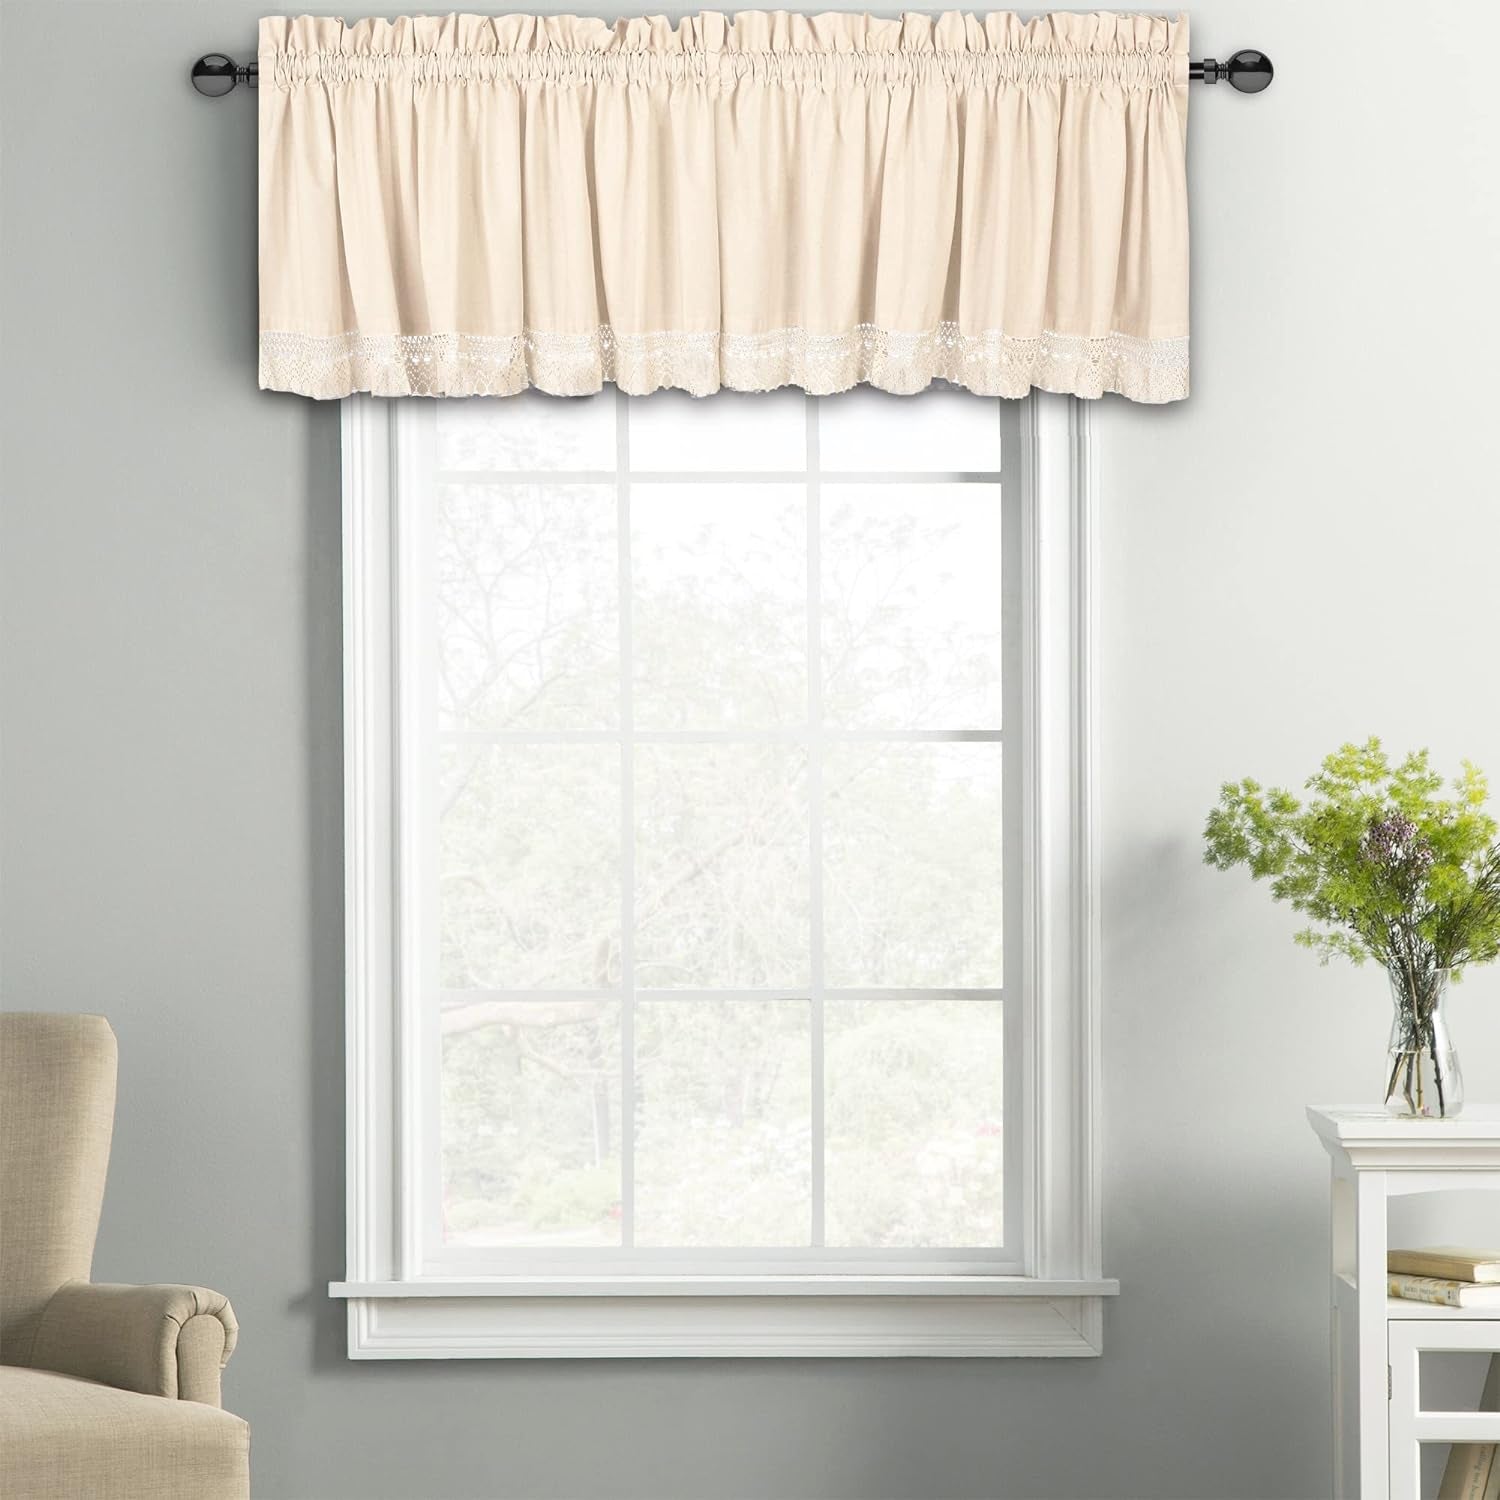 Cotton Flax Window Valances Set of 2 for Country Style Farmhouse Vintage Décor - Eco Friendly 72 Inch Wide Valance with Lace - 72X16 Inch - Natural - 2 Valances